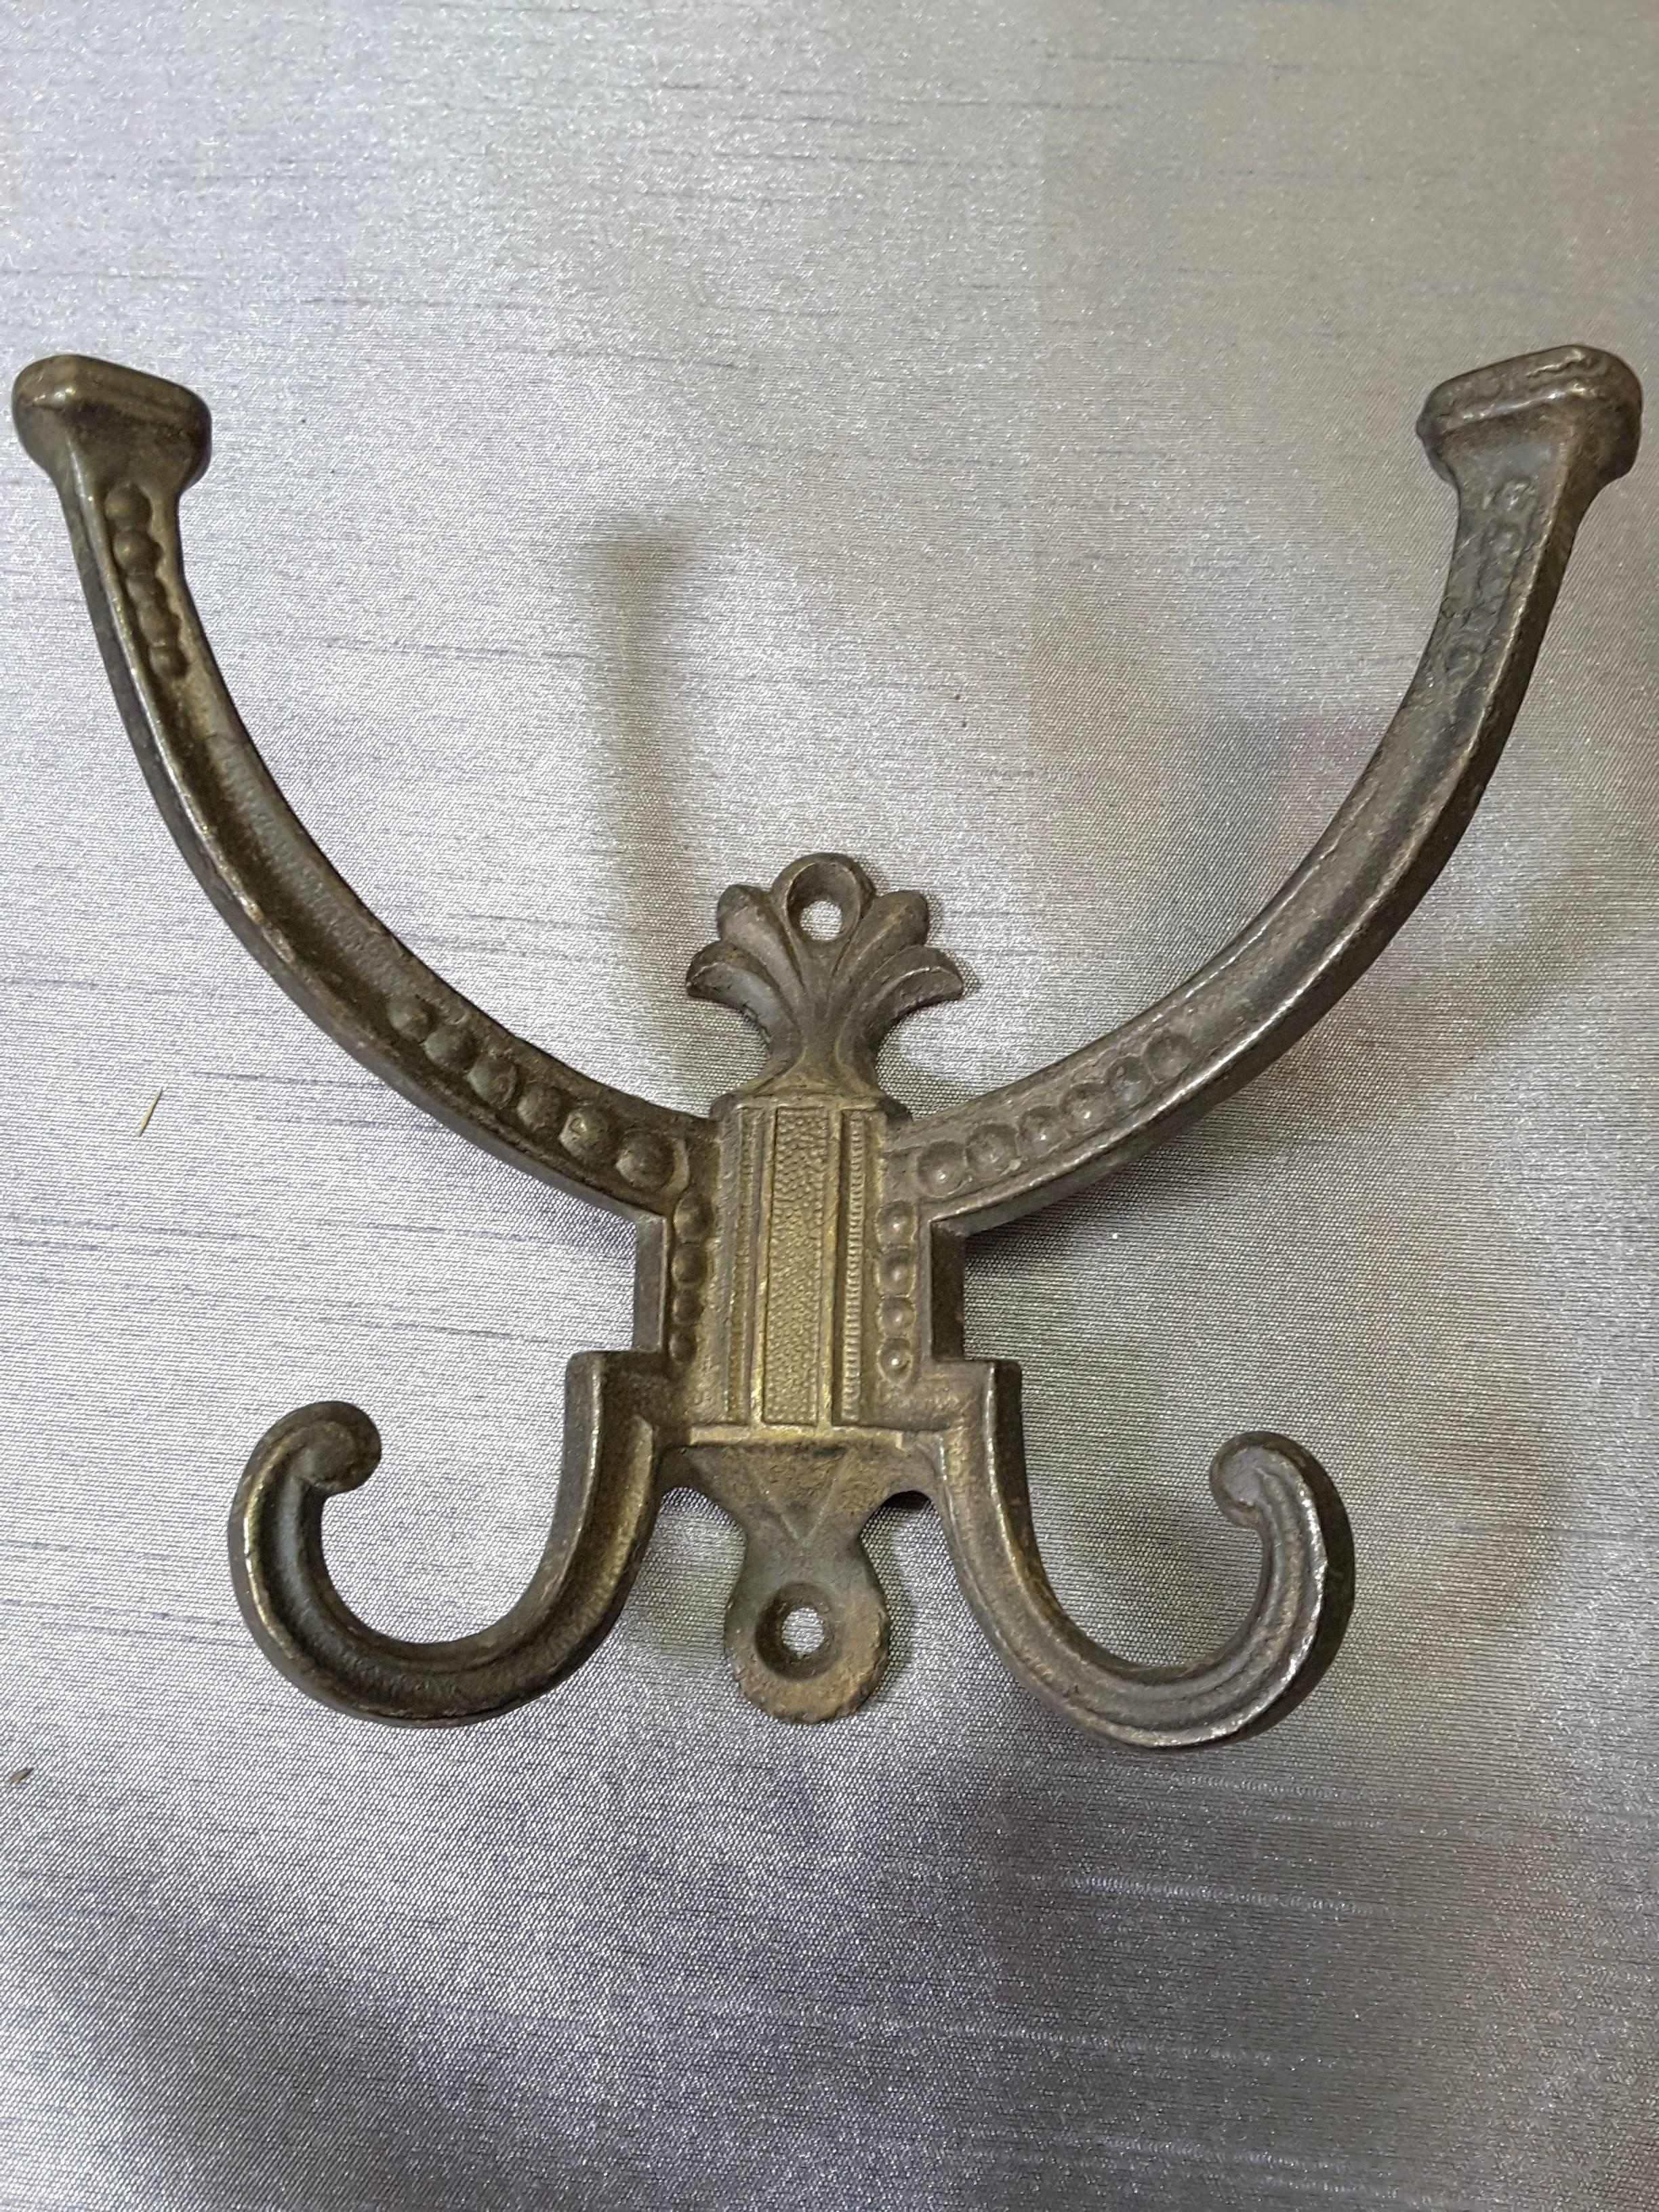 Unknown Pair of Victorian Hallstand or Coat Rack Hooks, Dated 1878 and Marked